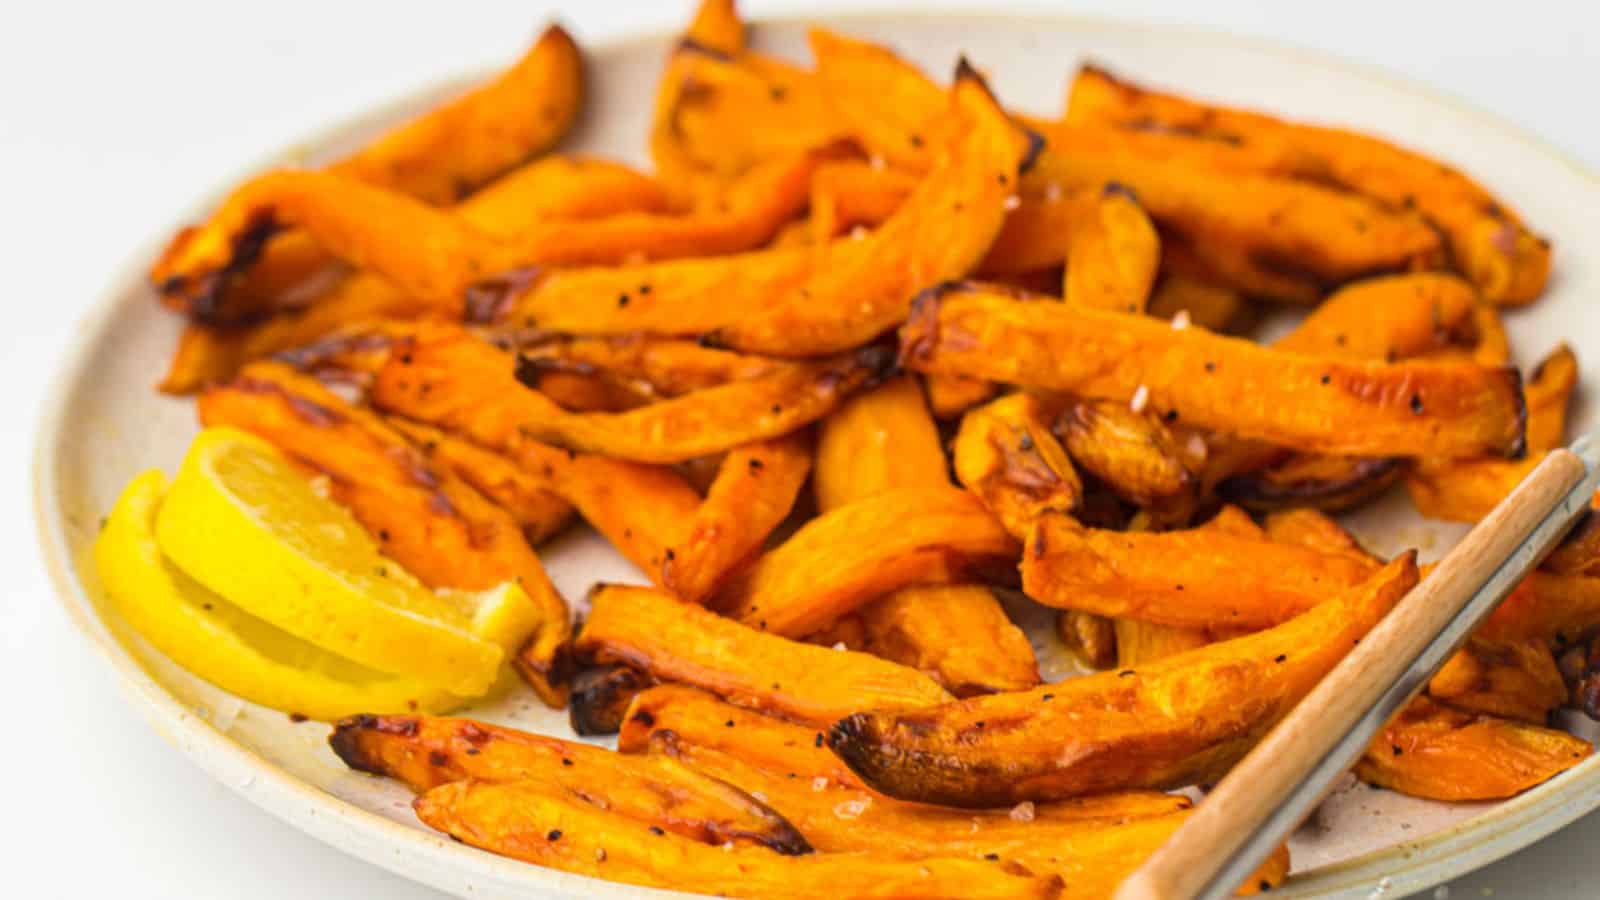 A plate of sweet potato fries with a wooden spoon.